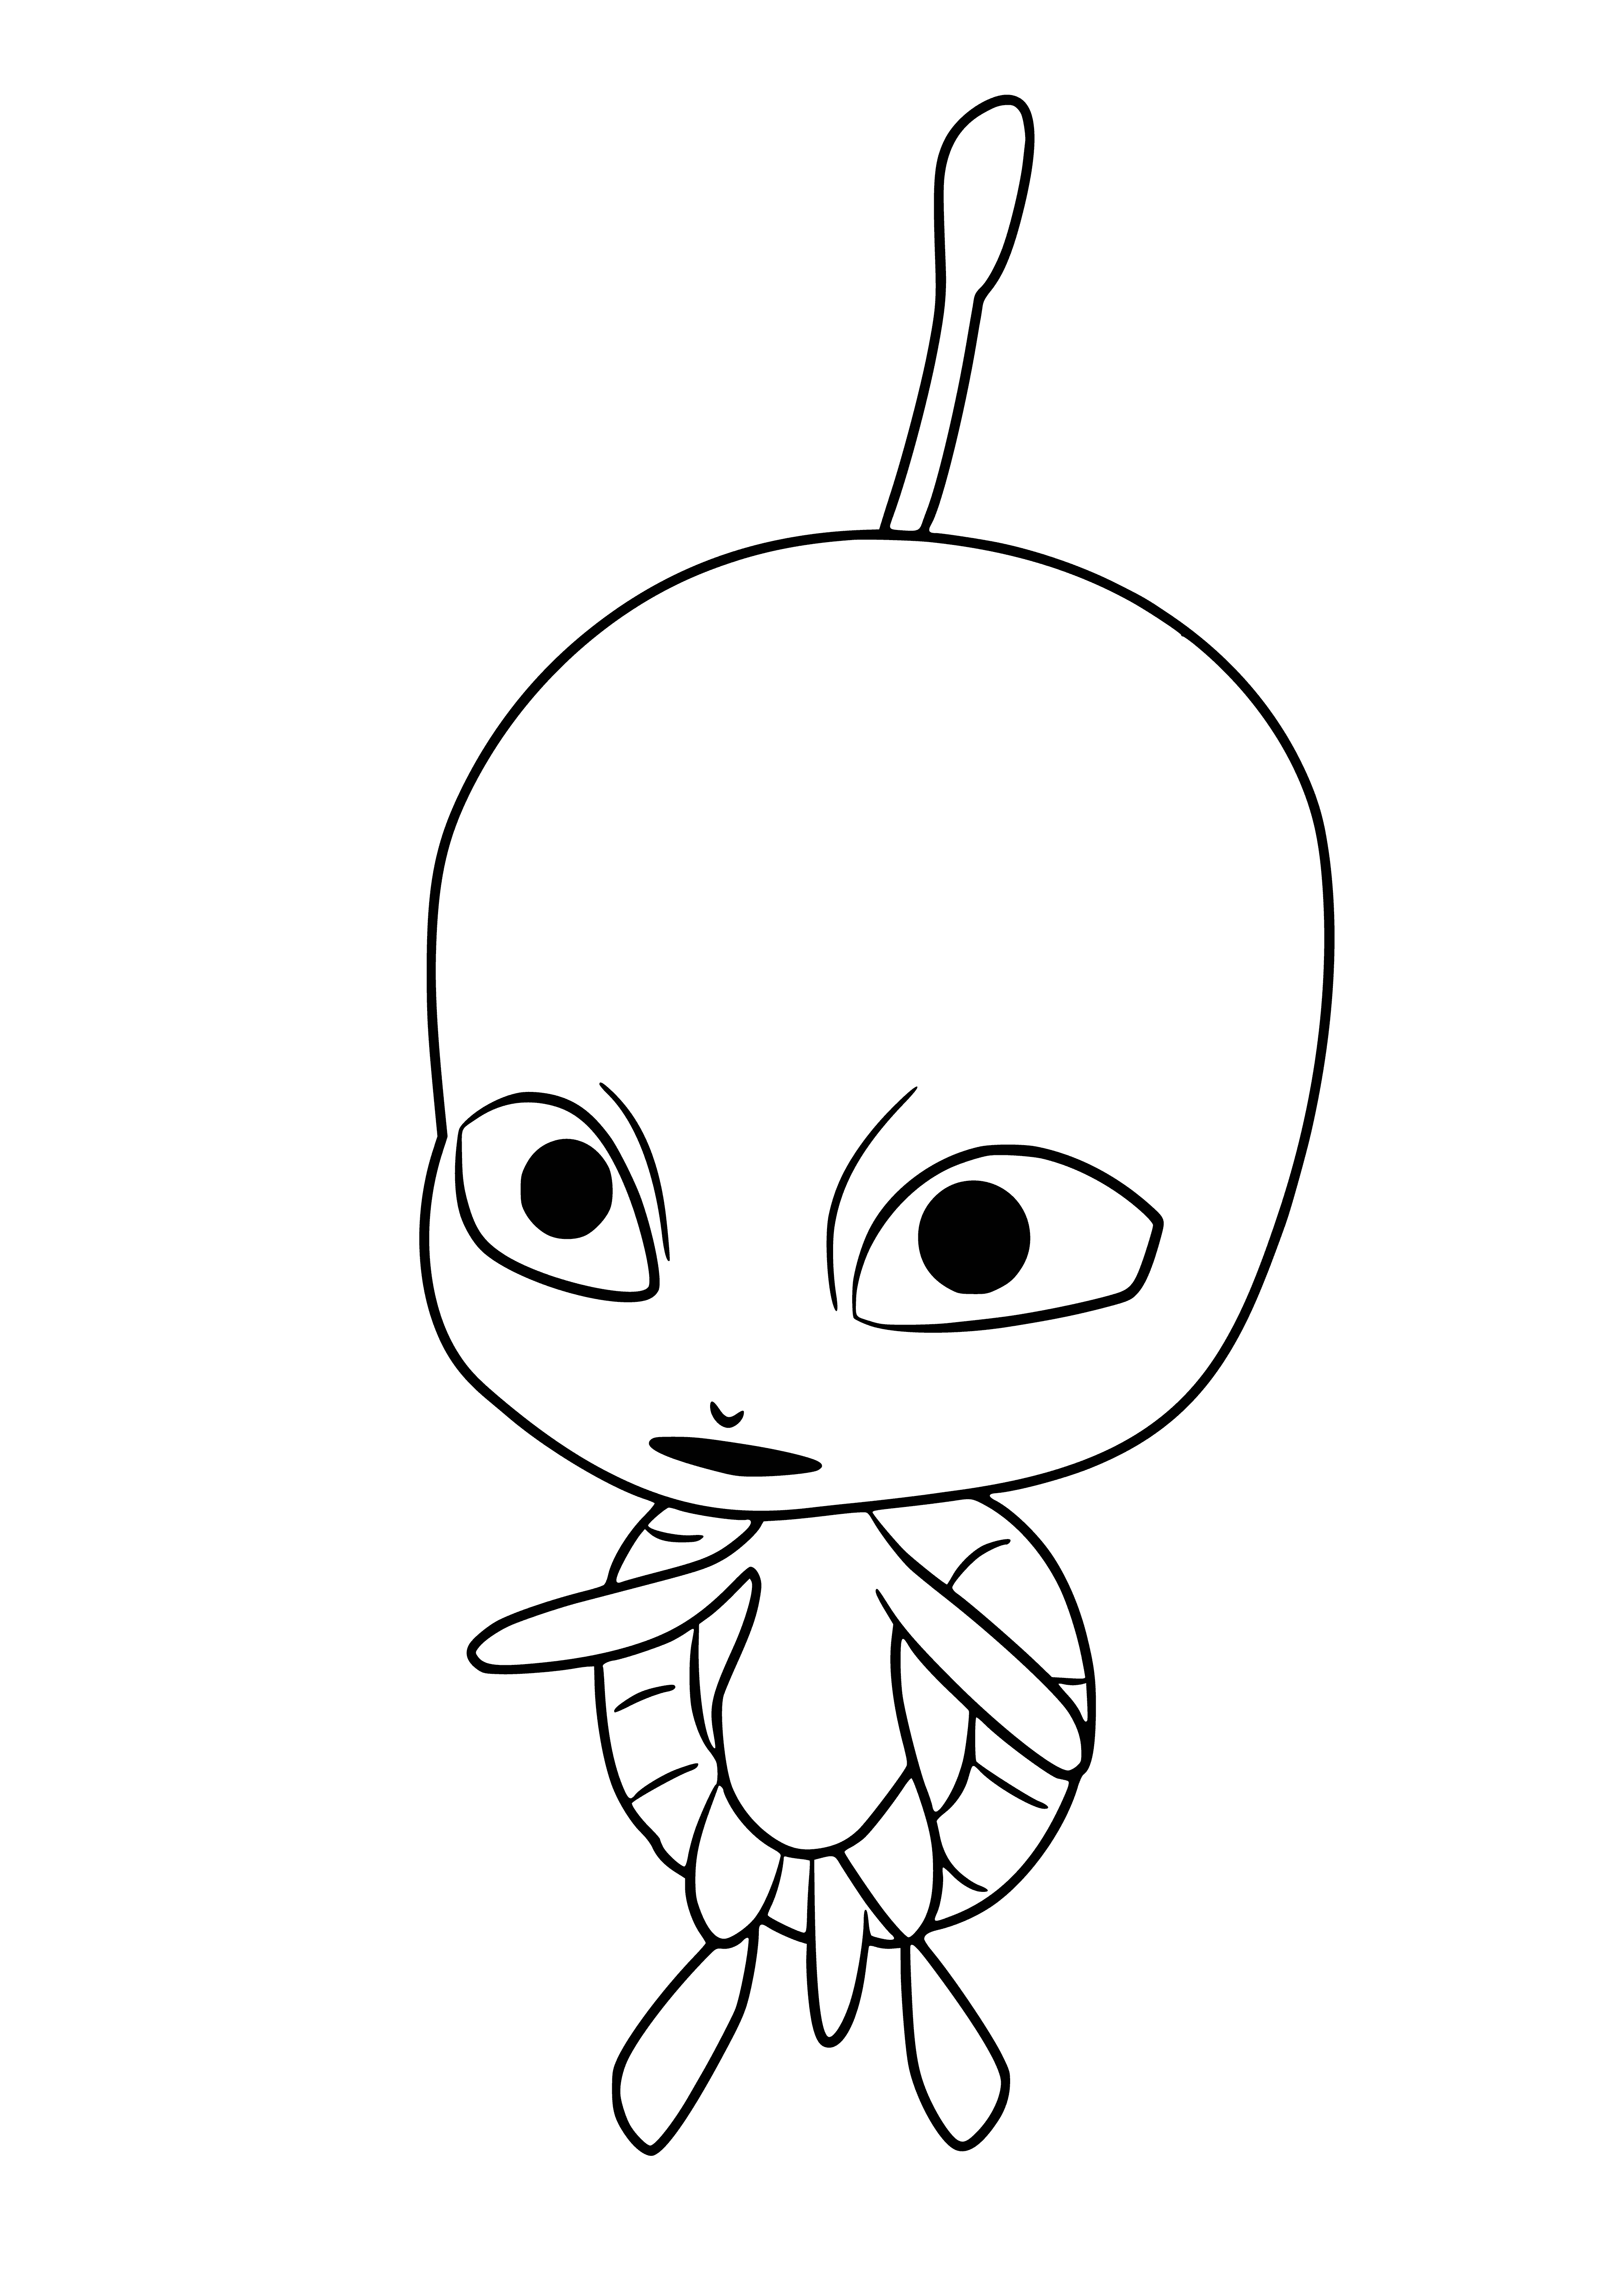 Kwami Turtle Wise coloring page